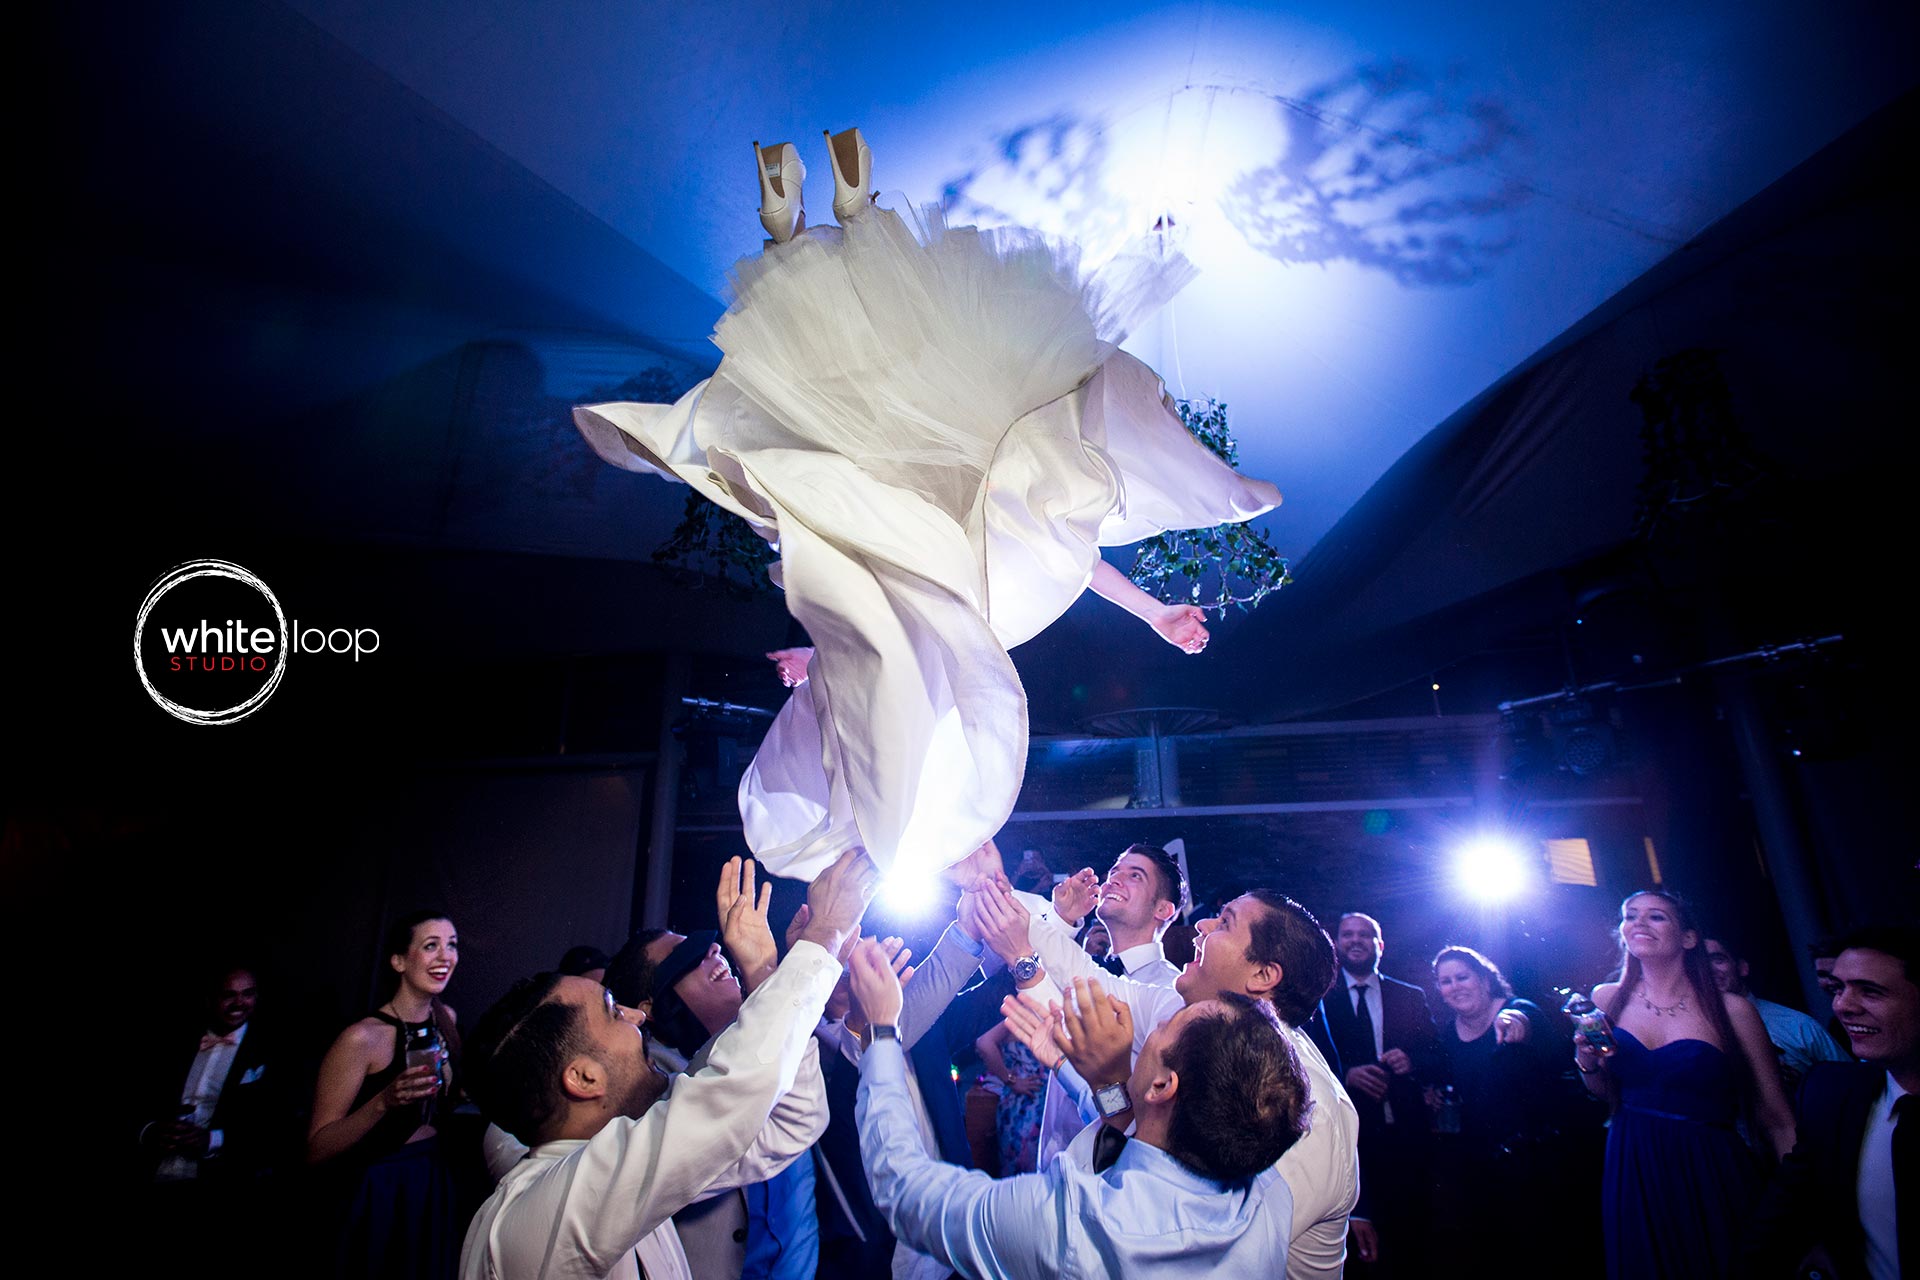 Some gentleman’s at the party launch the bride in the air, celebrating the engagement between her and the groom.